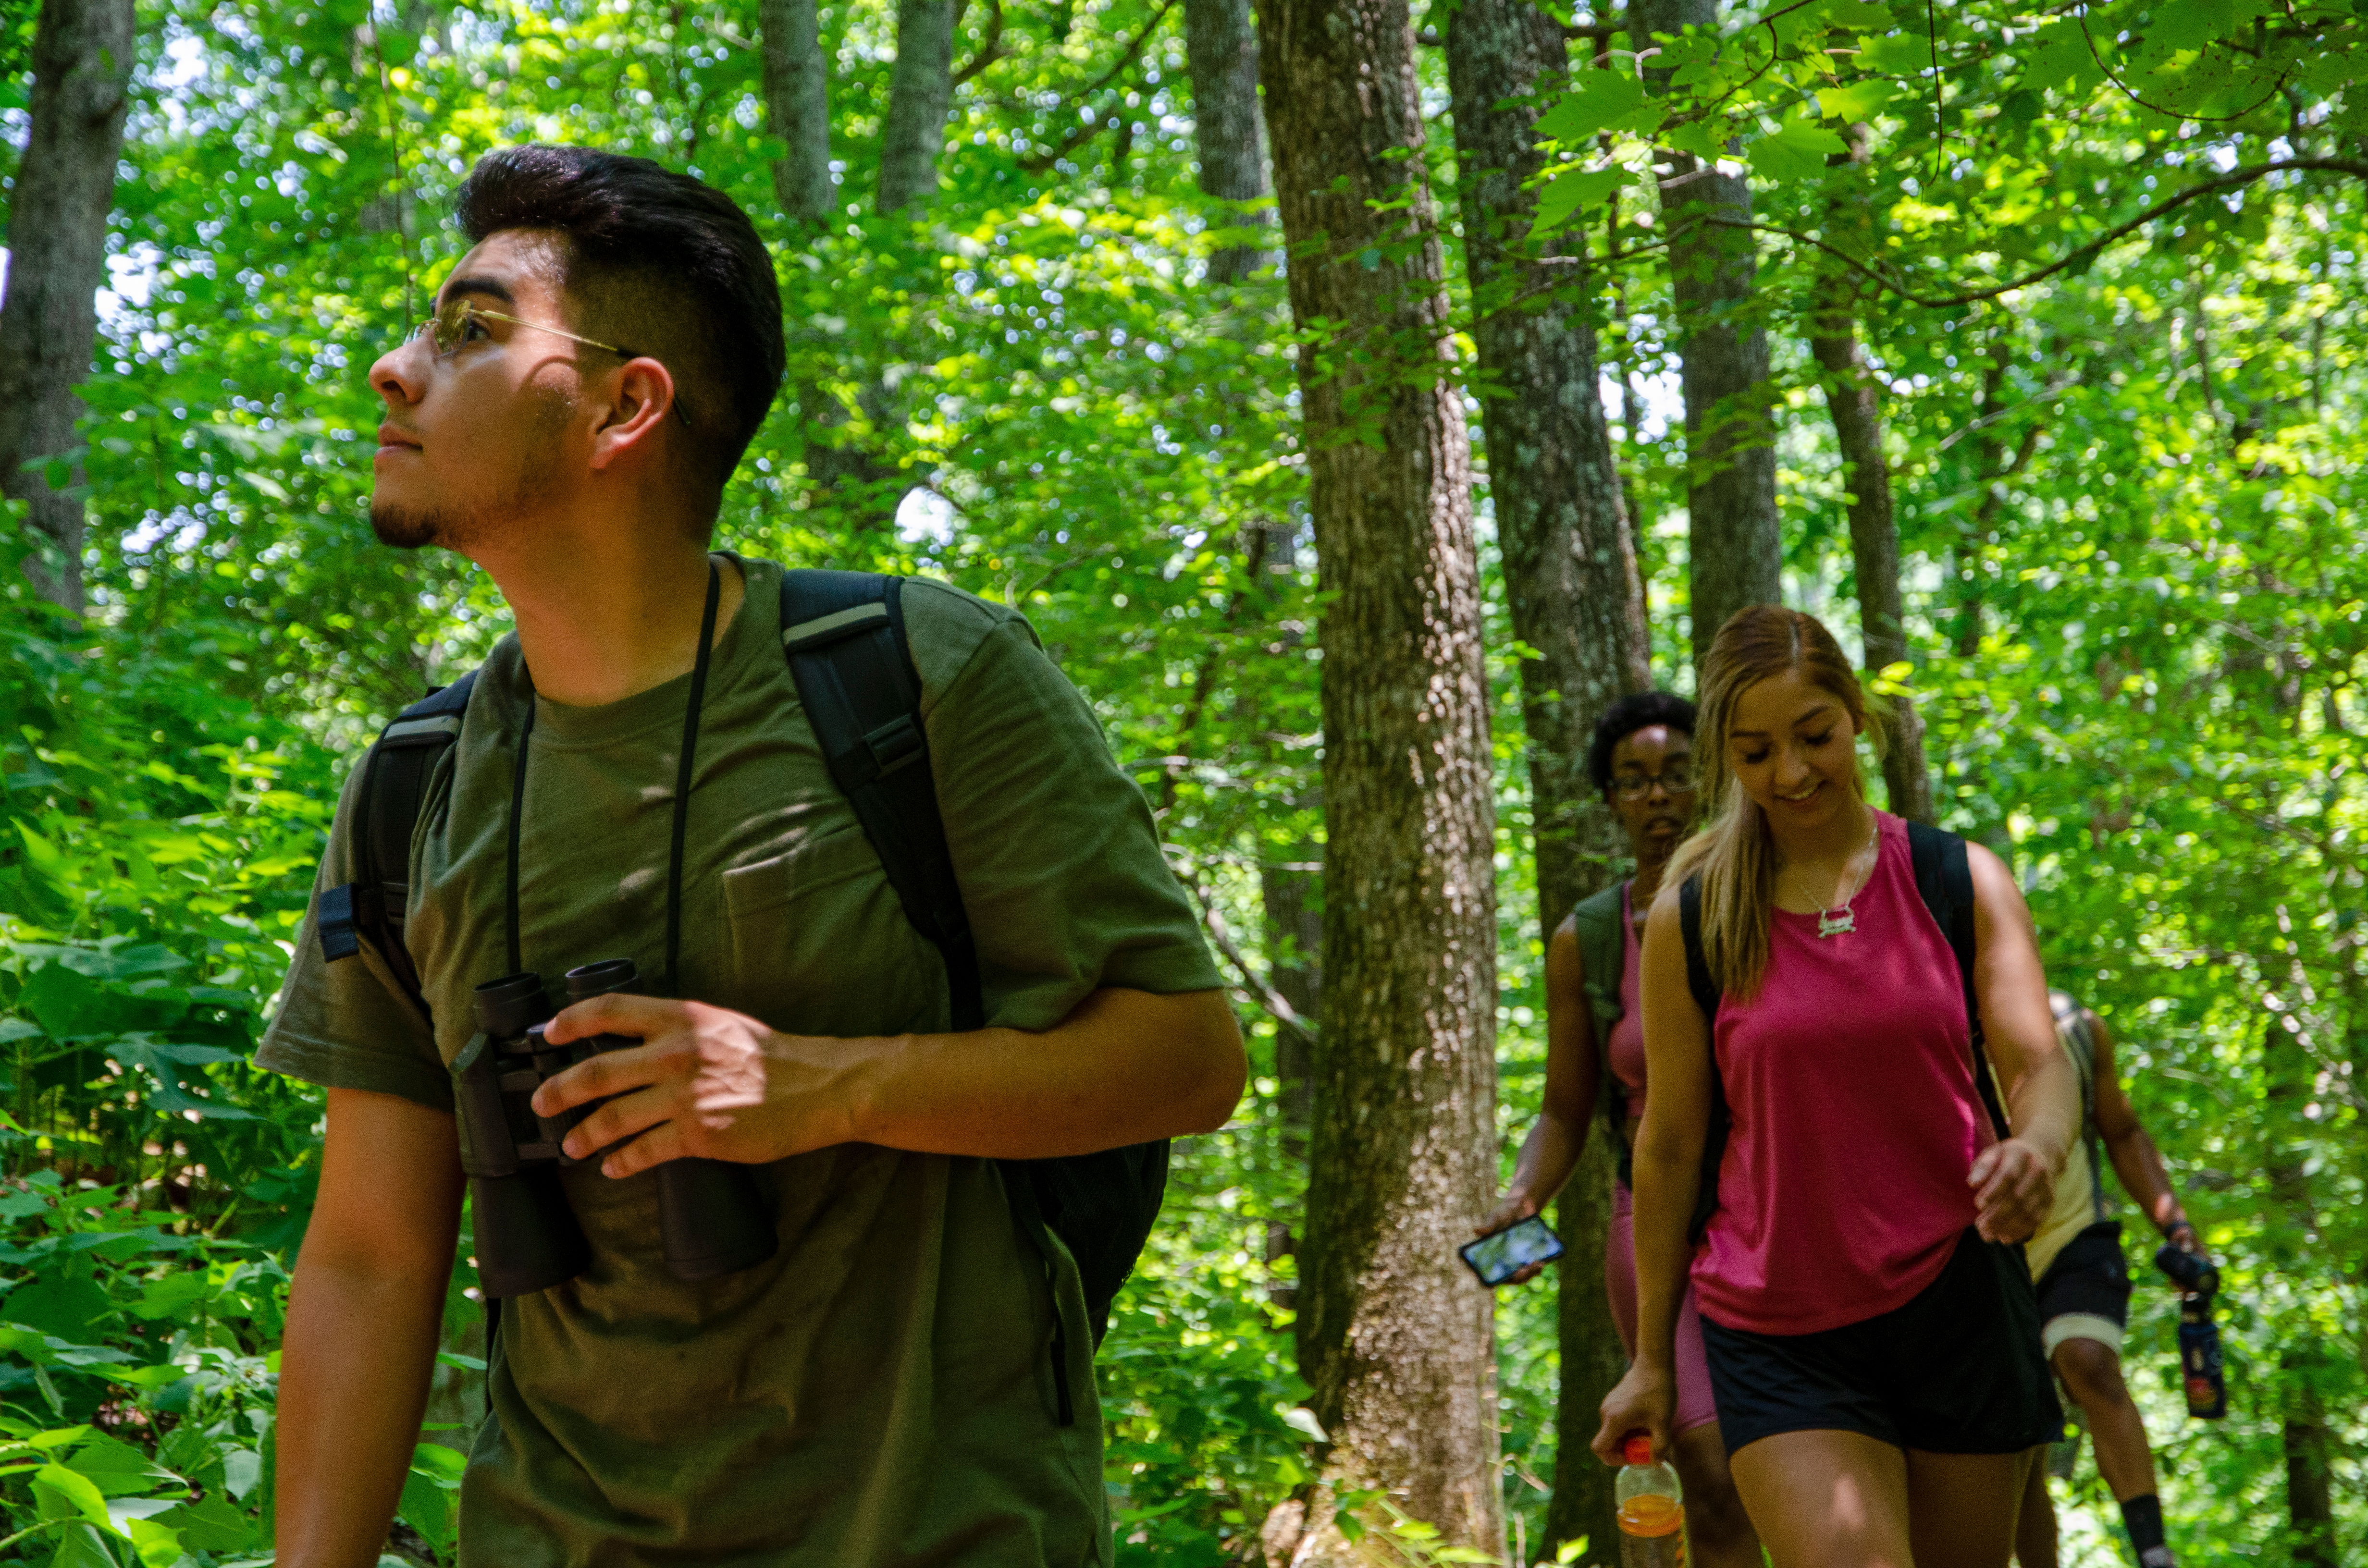 A group of young people walk down a trail surrounded by trees